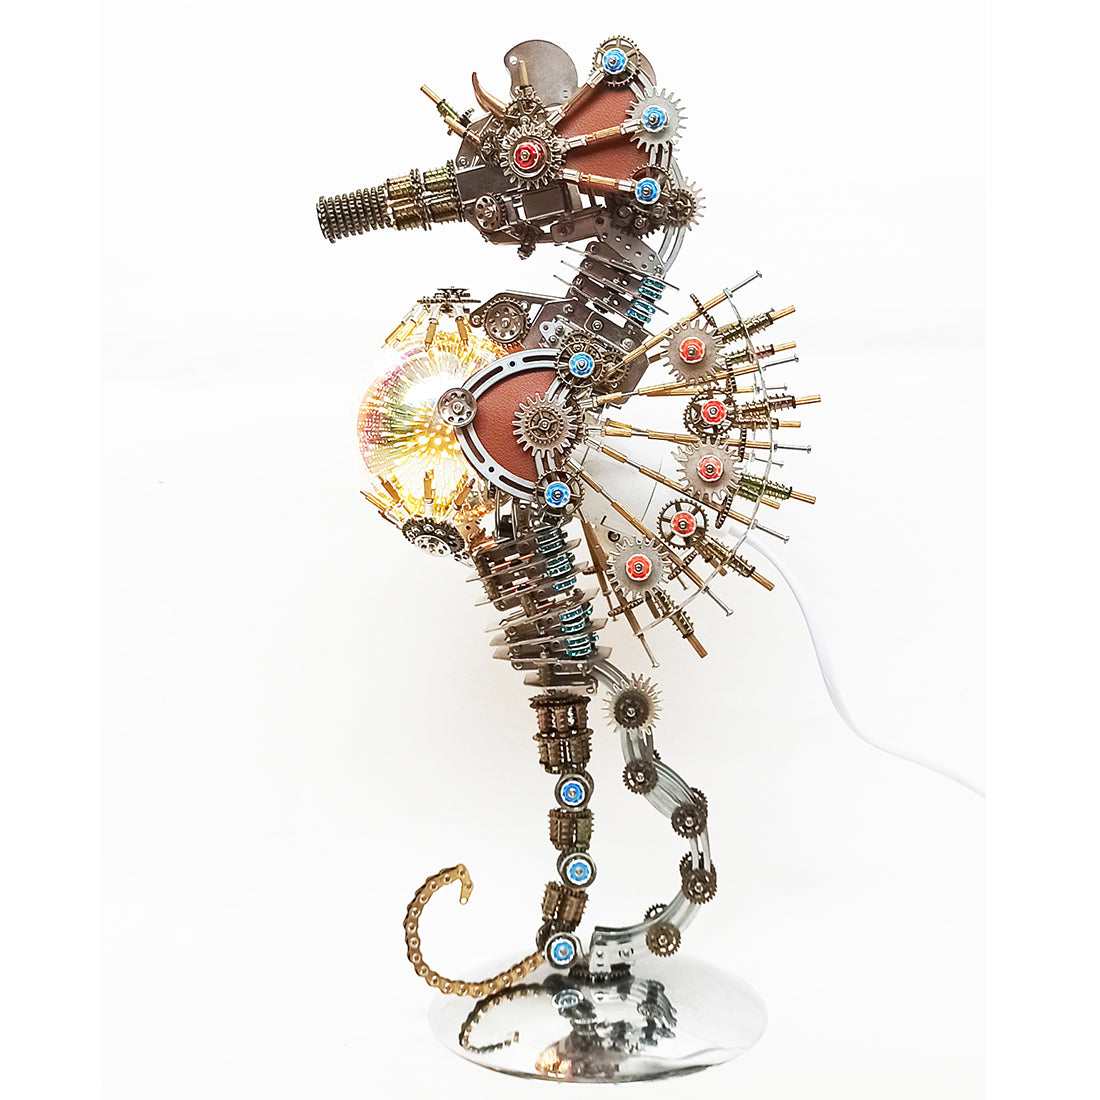 Steampunk Style Pregnant Seahorse Holding Planet  Metal Model Kits -Keep the Planet Healthy